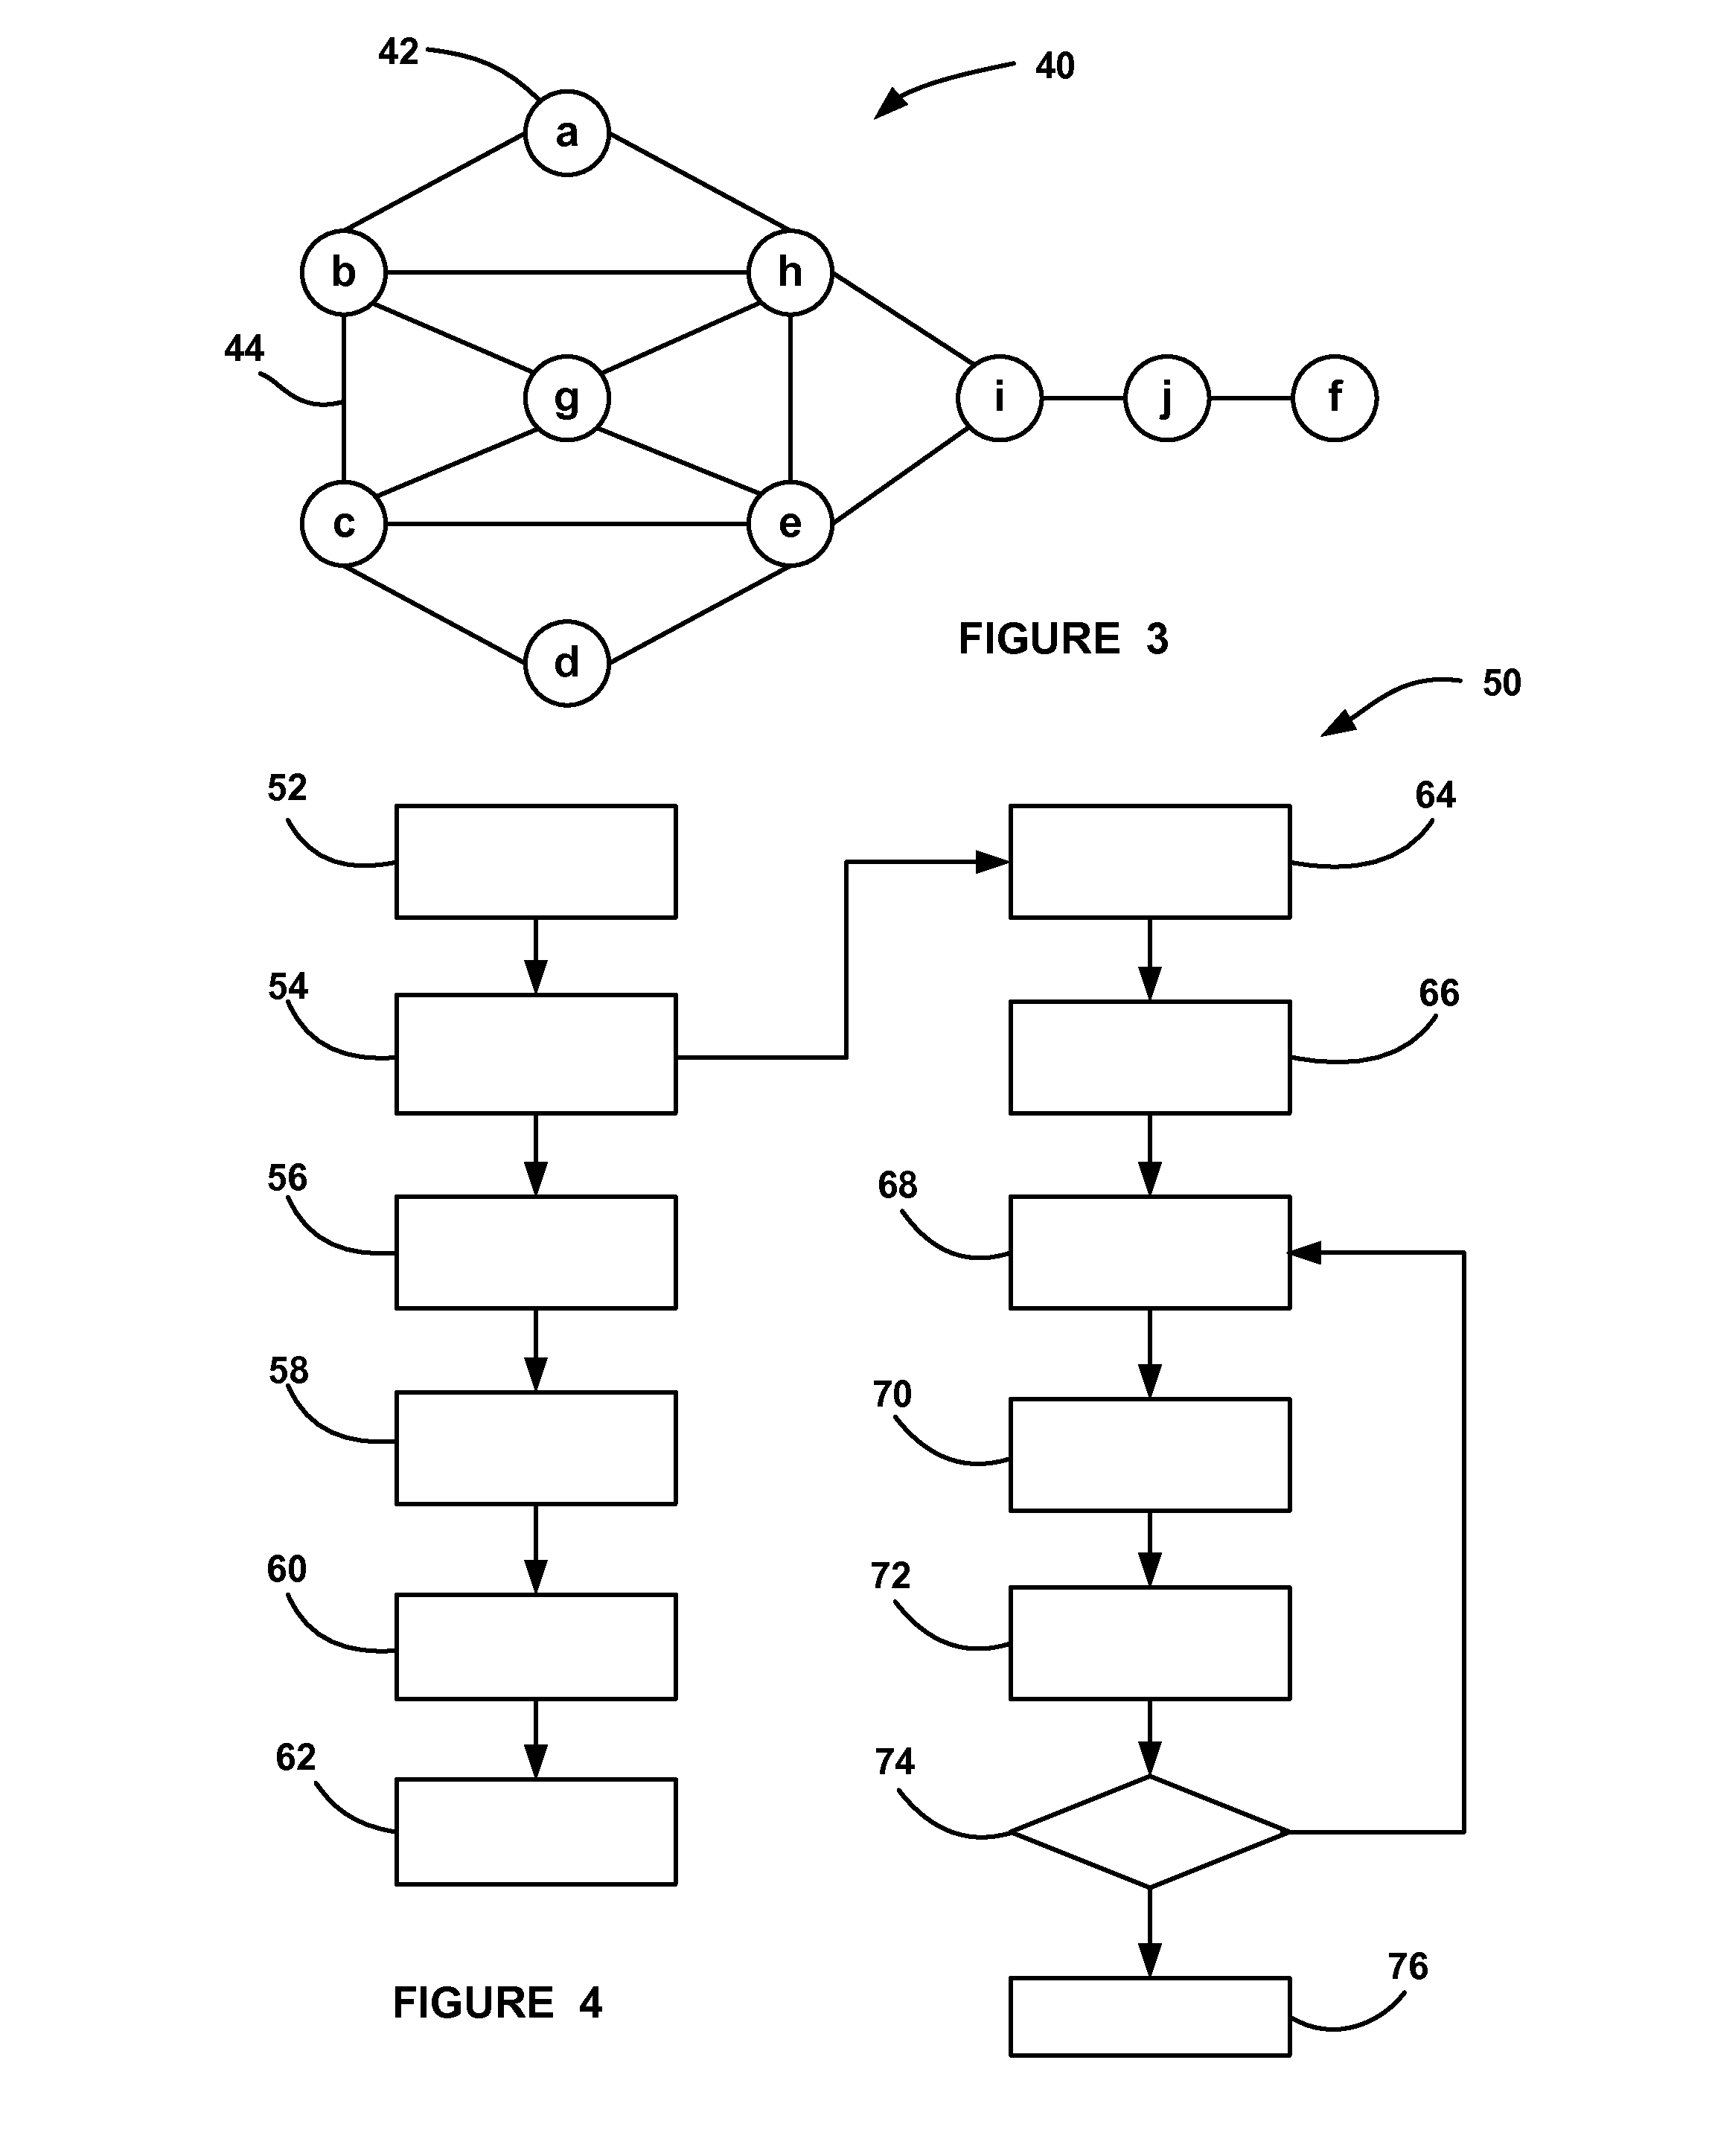 System and methods for fault-isolation and fault-mitigation based on network modeling